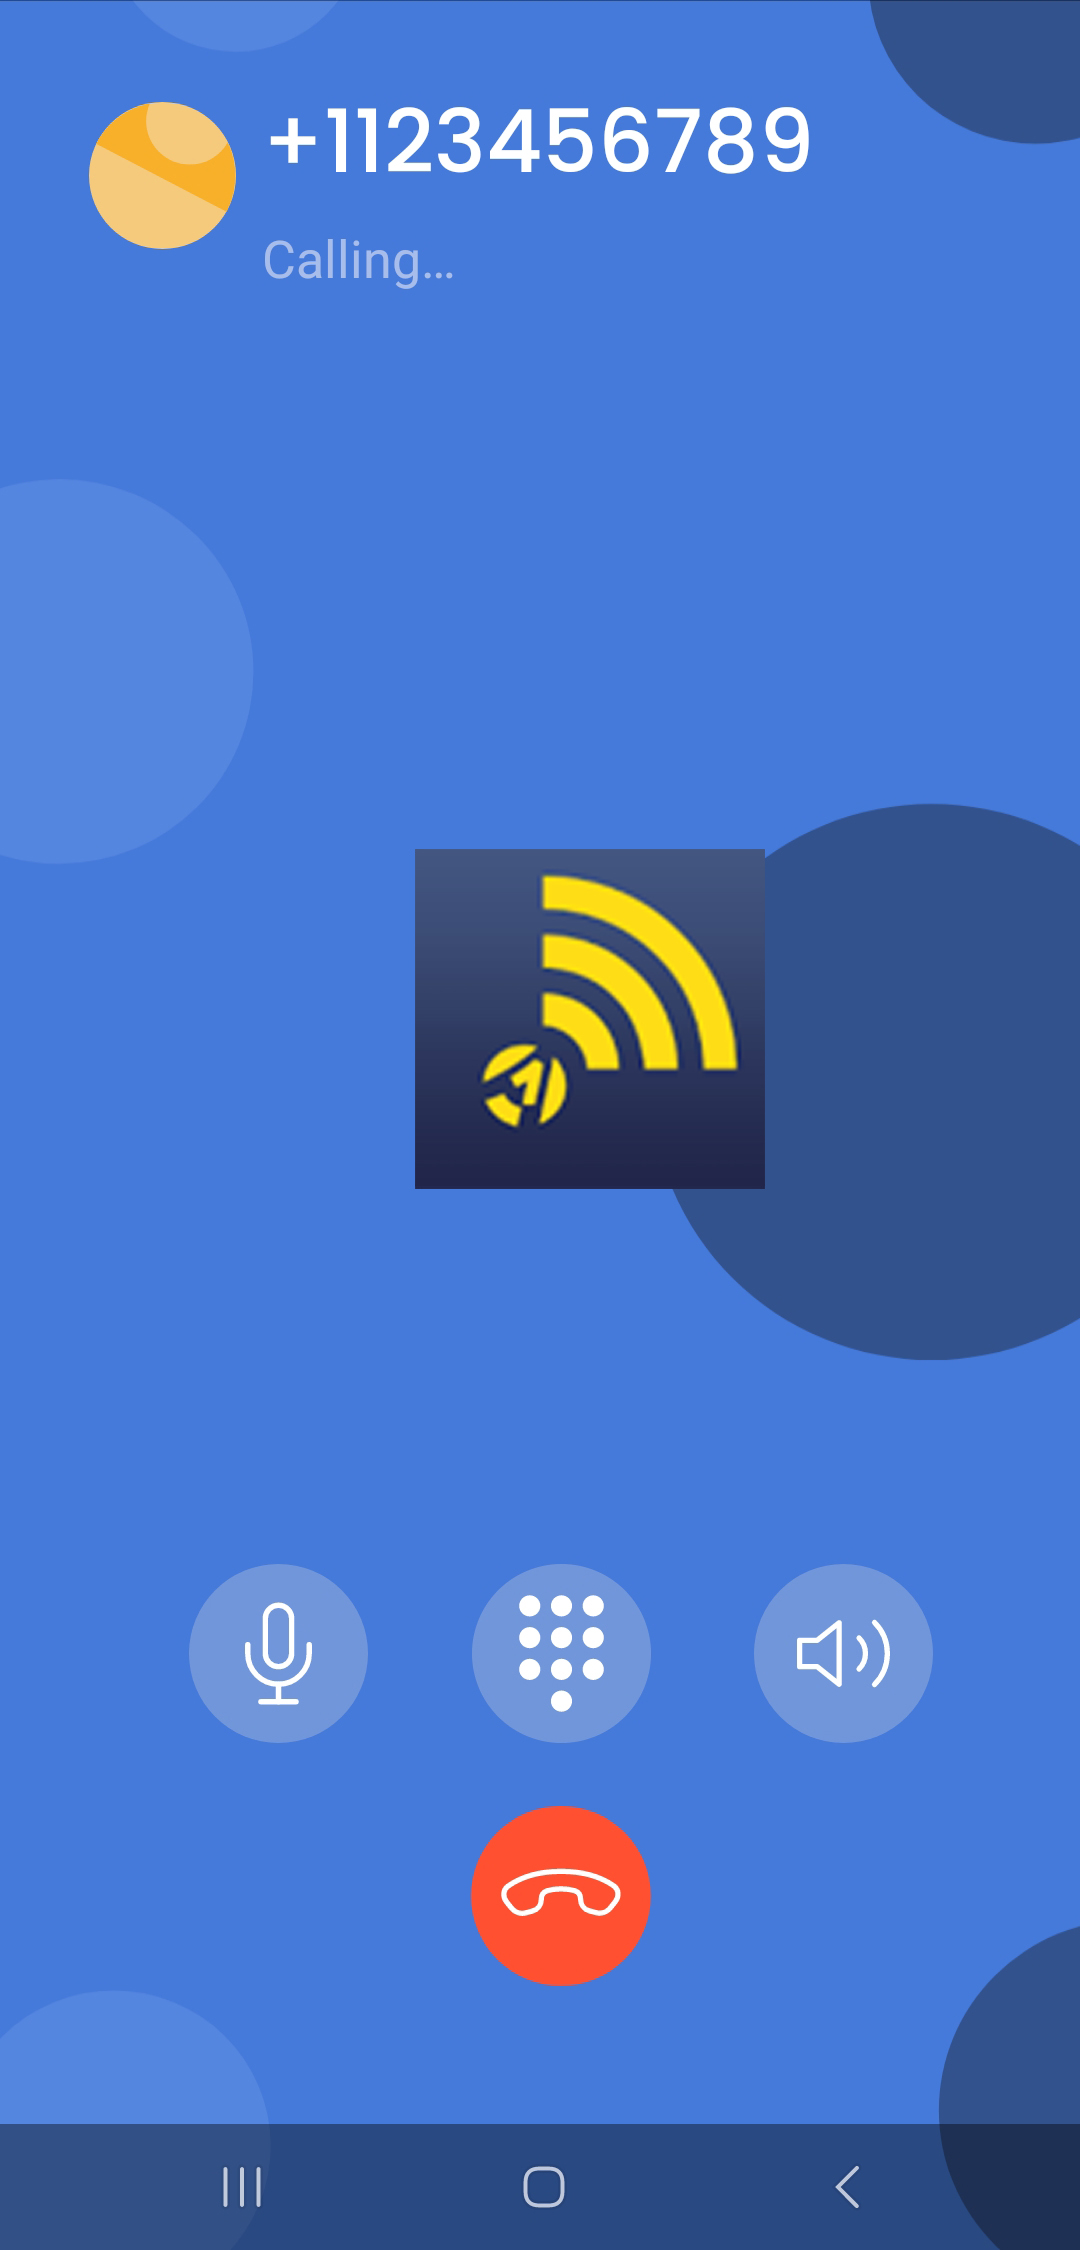 Image of the OneSim VoIP app making an international call using VoIP when traveling